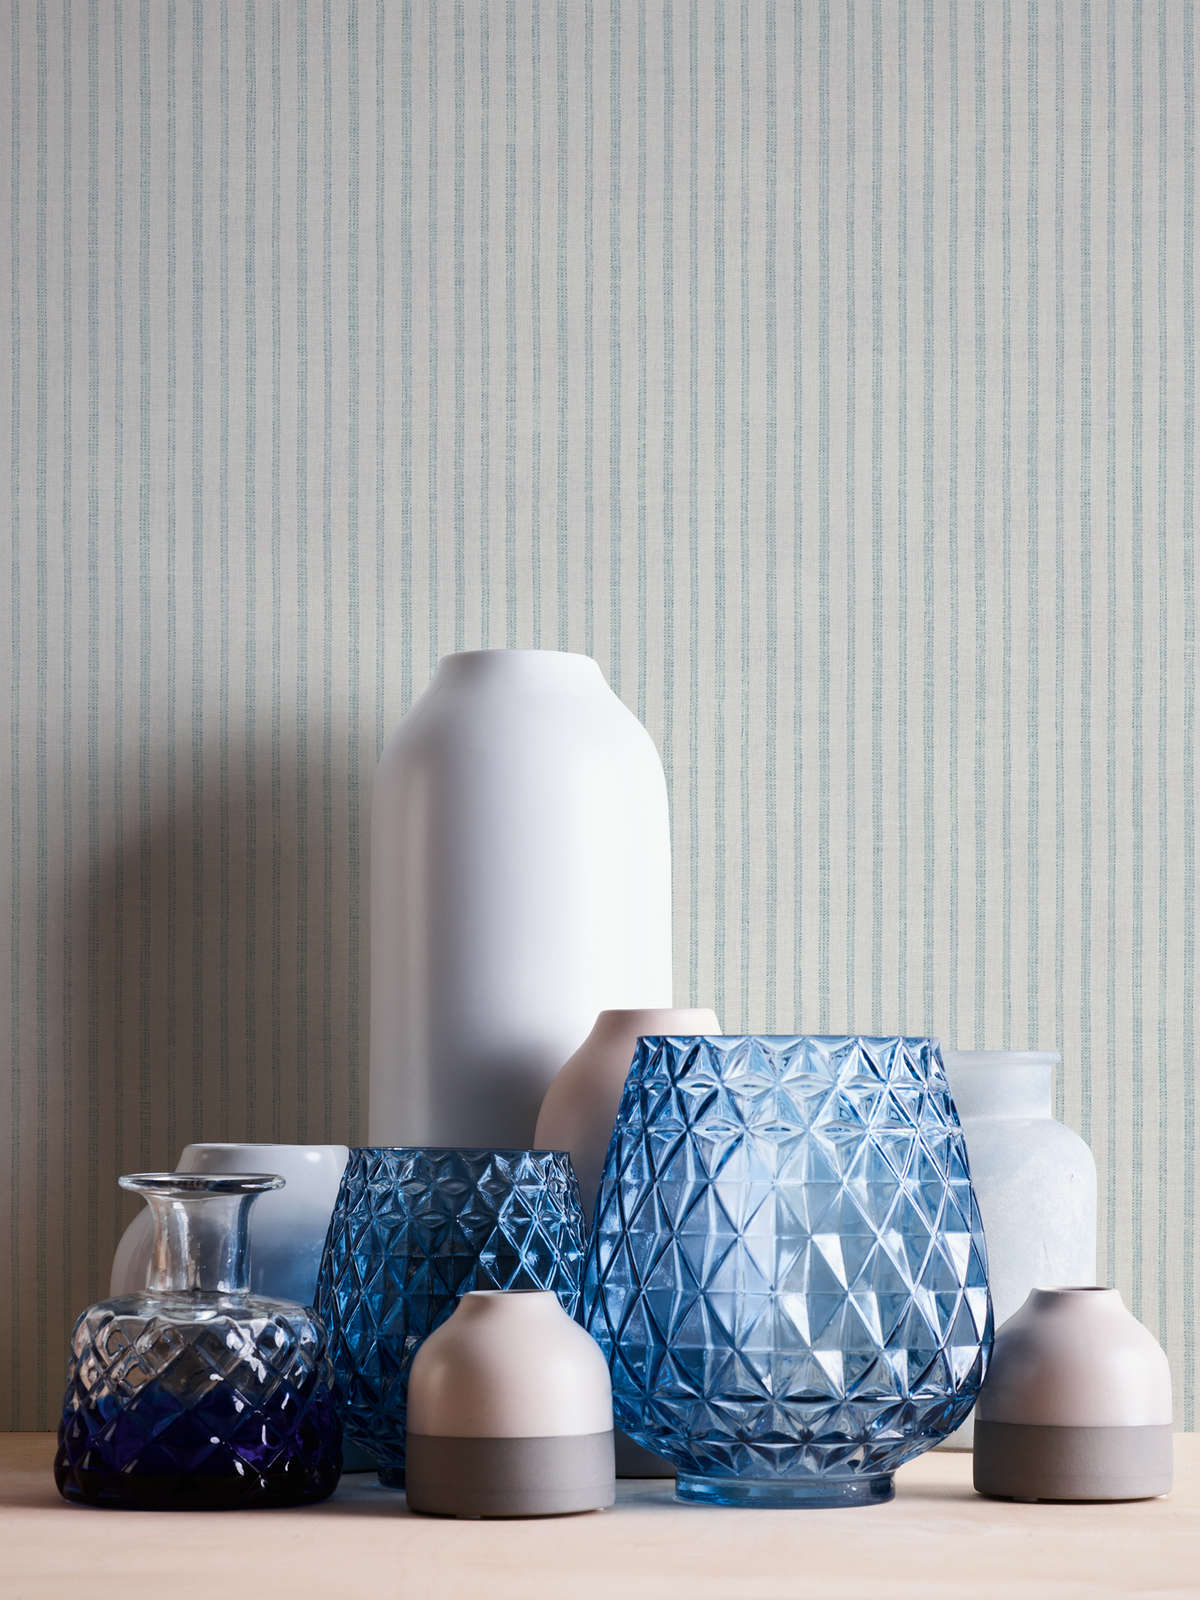             Non-woven wallpaper with subtle stripes in country style - cream, blue
        